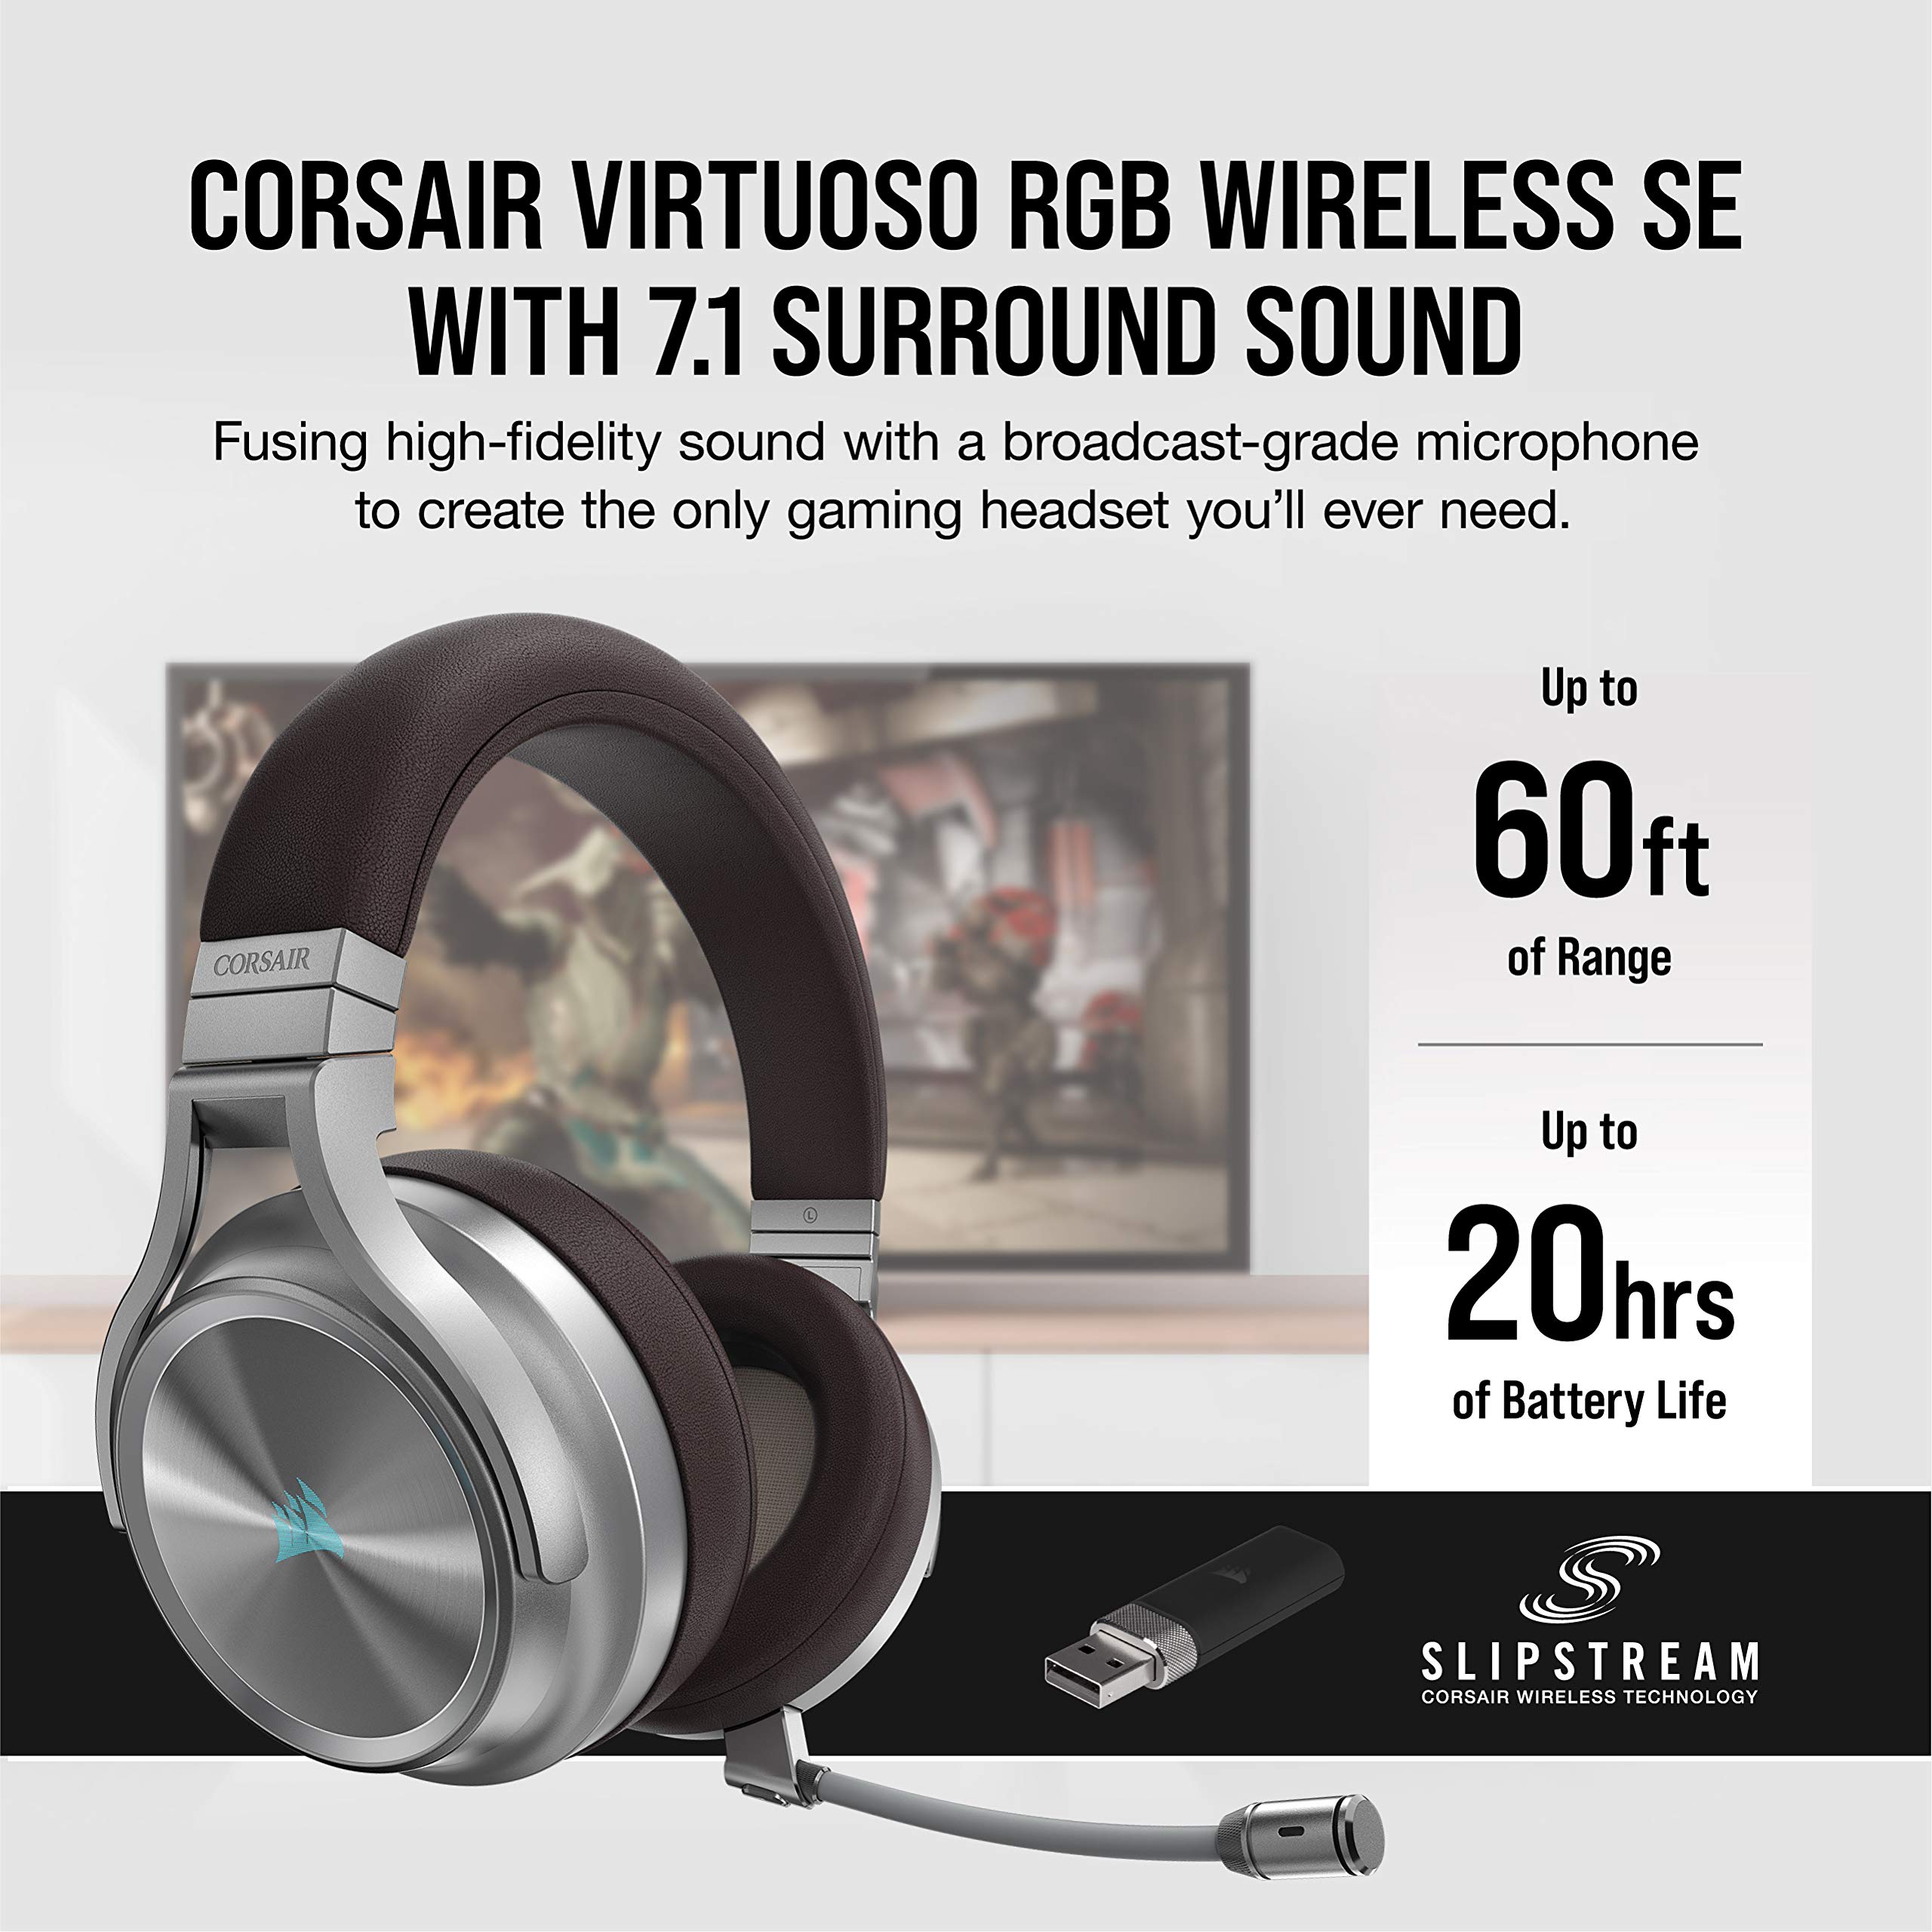 Corsair Virtuoso RGB Wireless SE Gaming Headset - High-Fidelity 7.1 Surround Sound W/Broadcast Quality Microphone, Memory Foam Earcups, 20 Hour Battery Life, Works w/PC, PS5, PS4 - Espresso